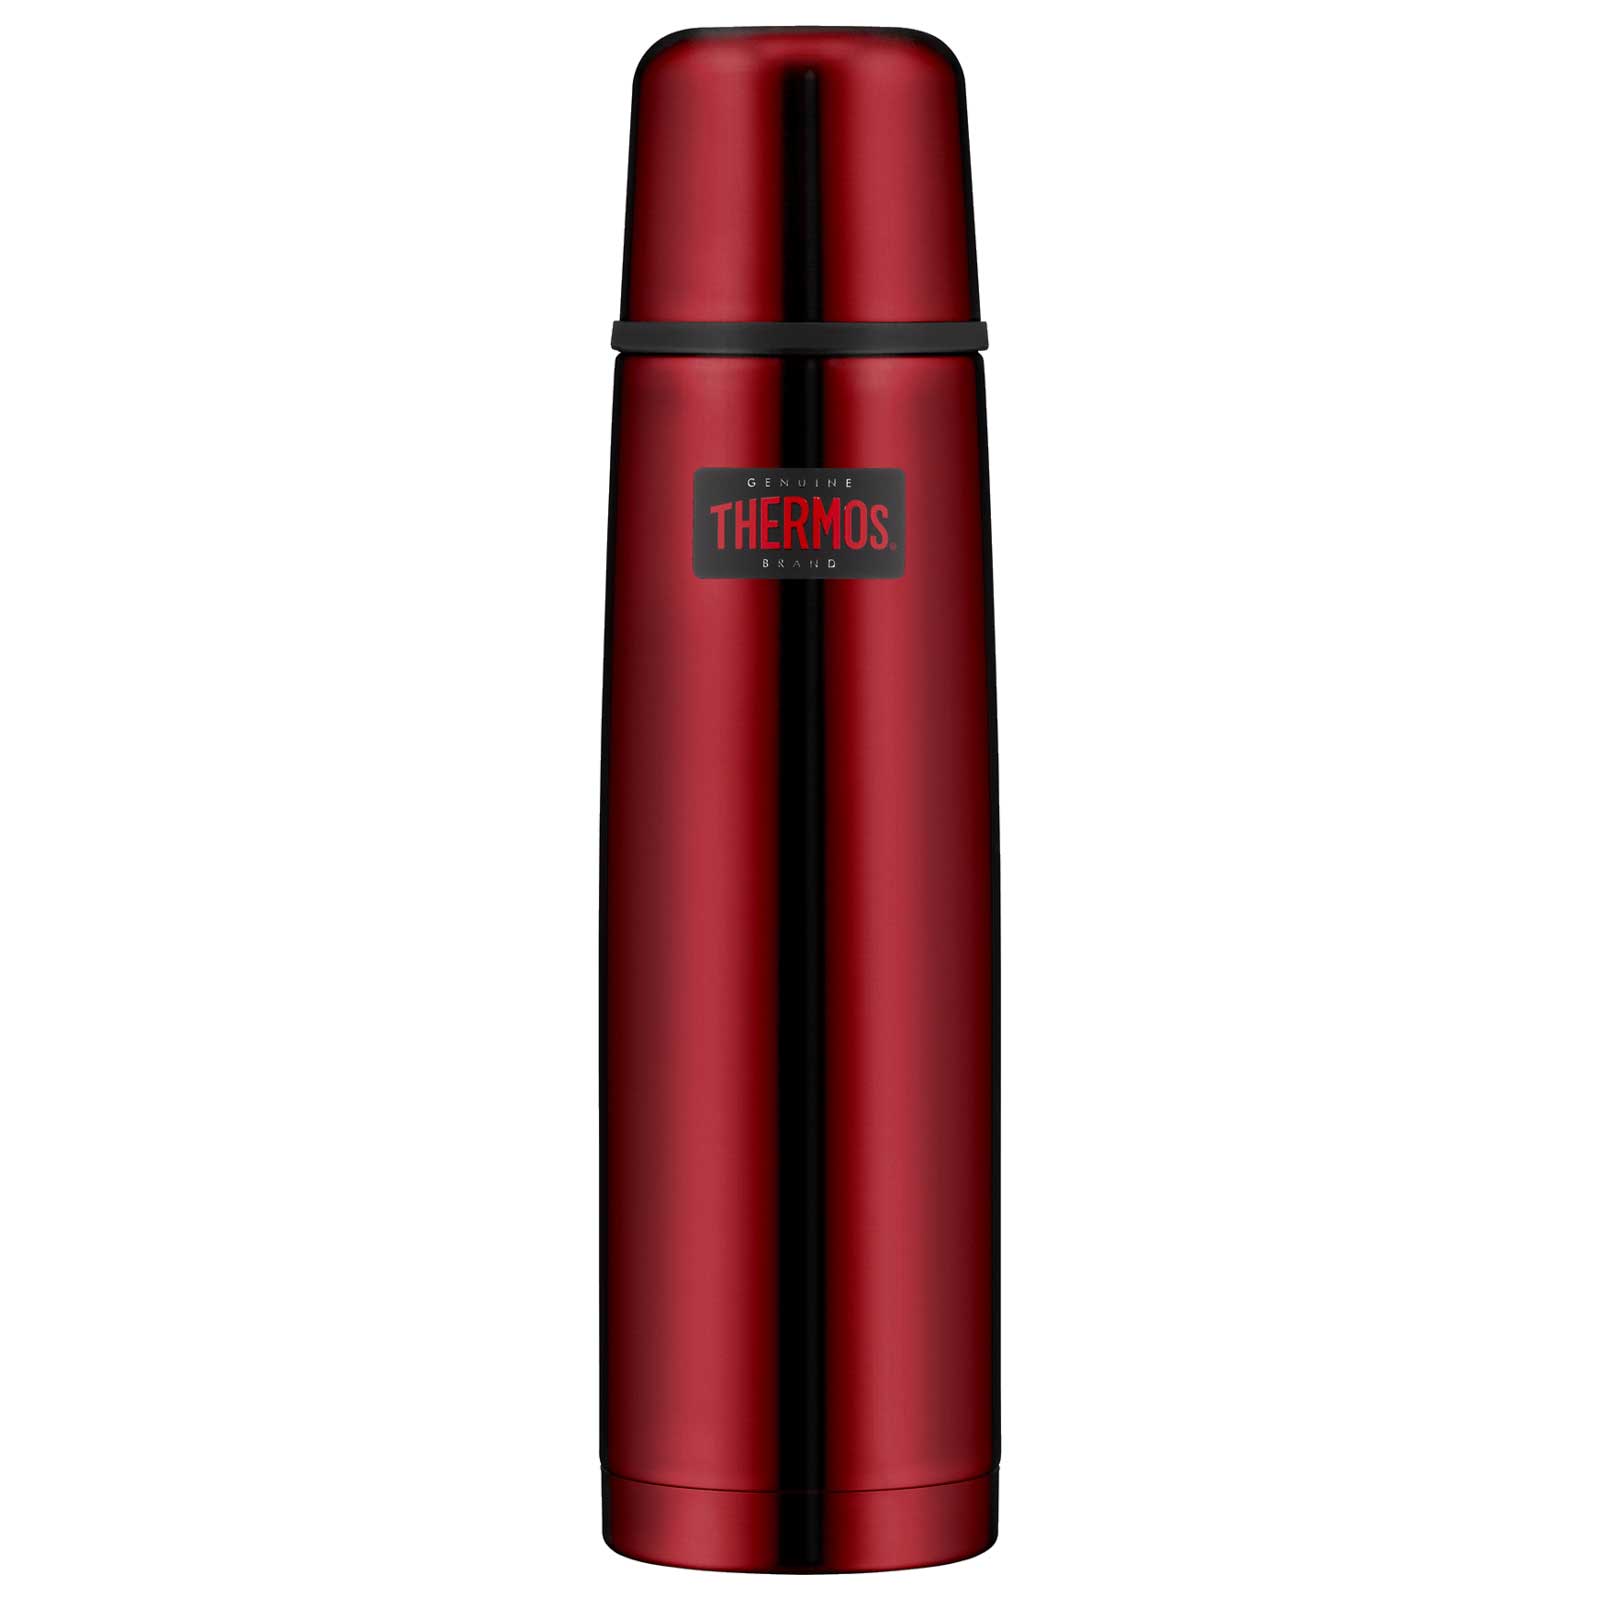 Productfoto van THERMOS® Light &amp; Compact Beverage Bottle 1.0L - cranberry red polished